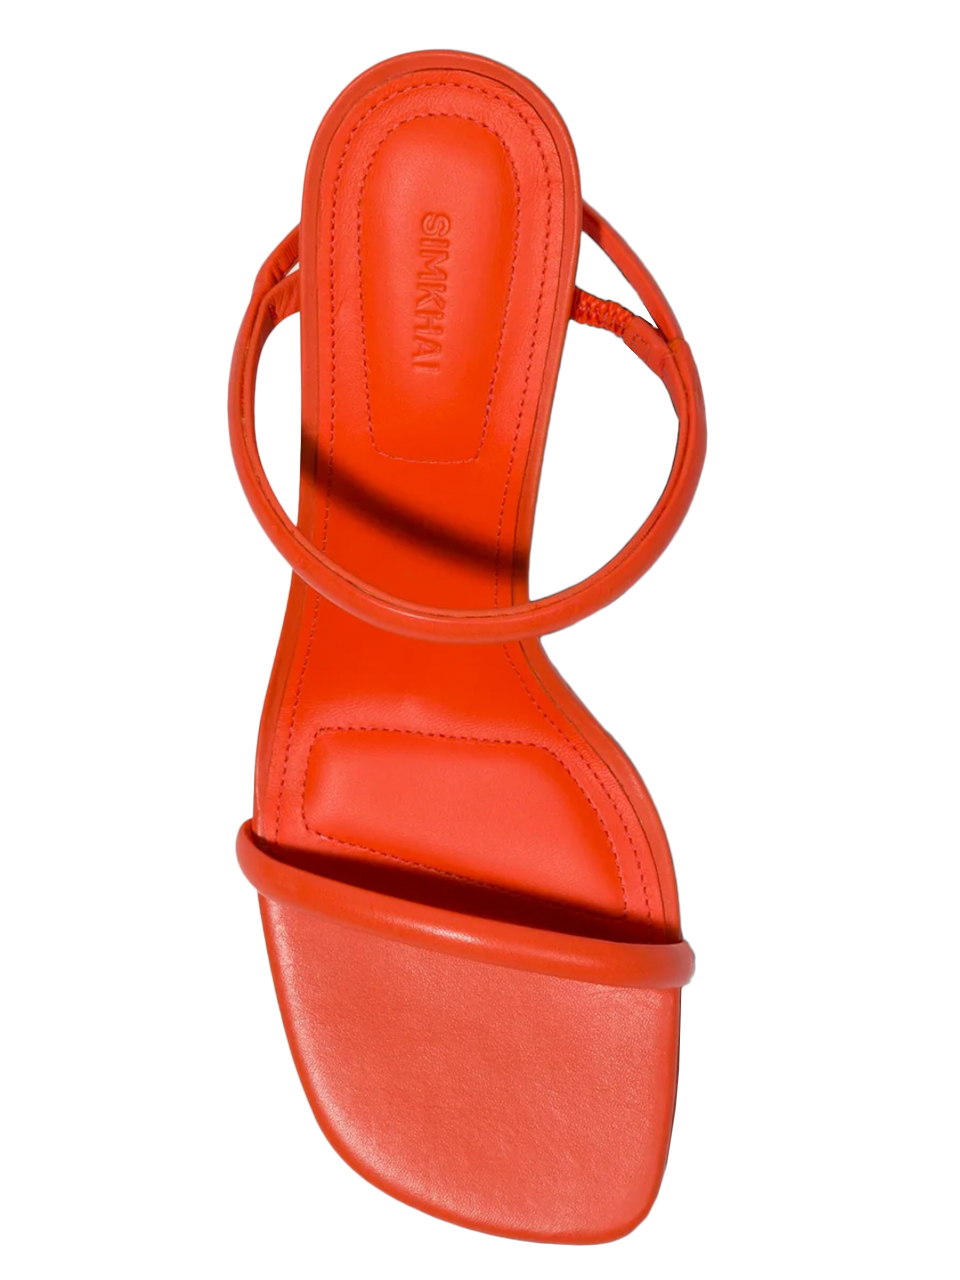 SIMKHAI Siren Low Leather Sandal in Flame Top View